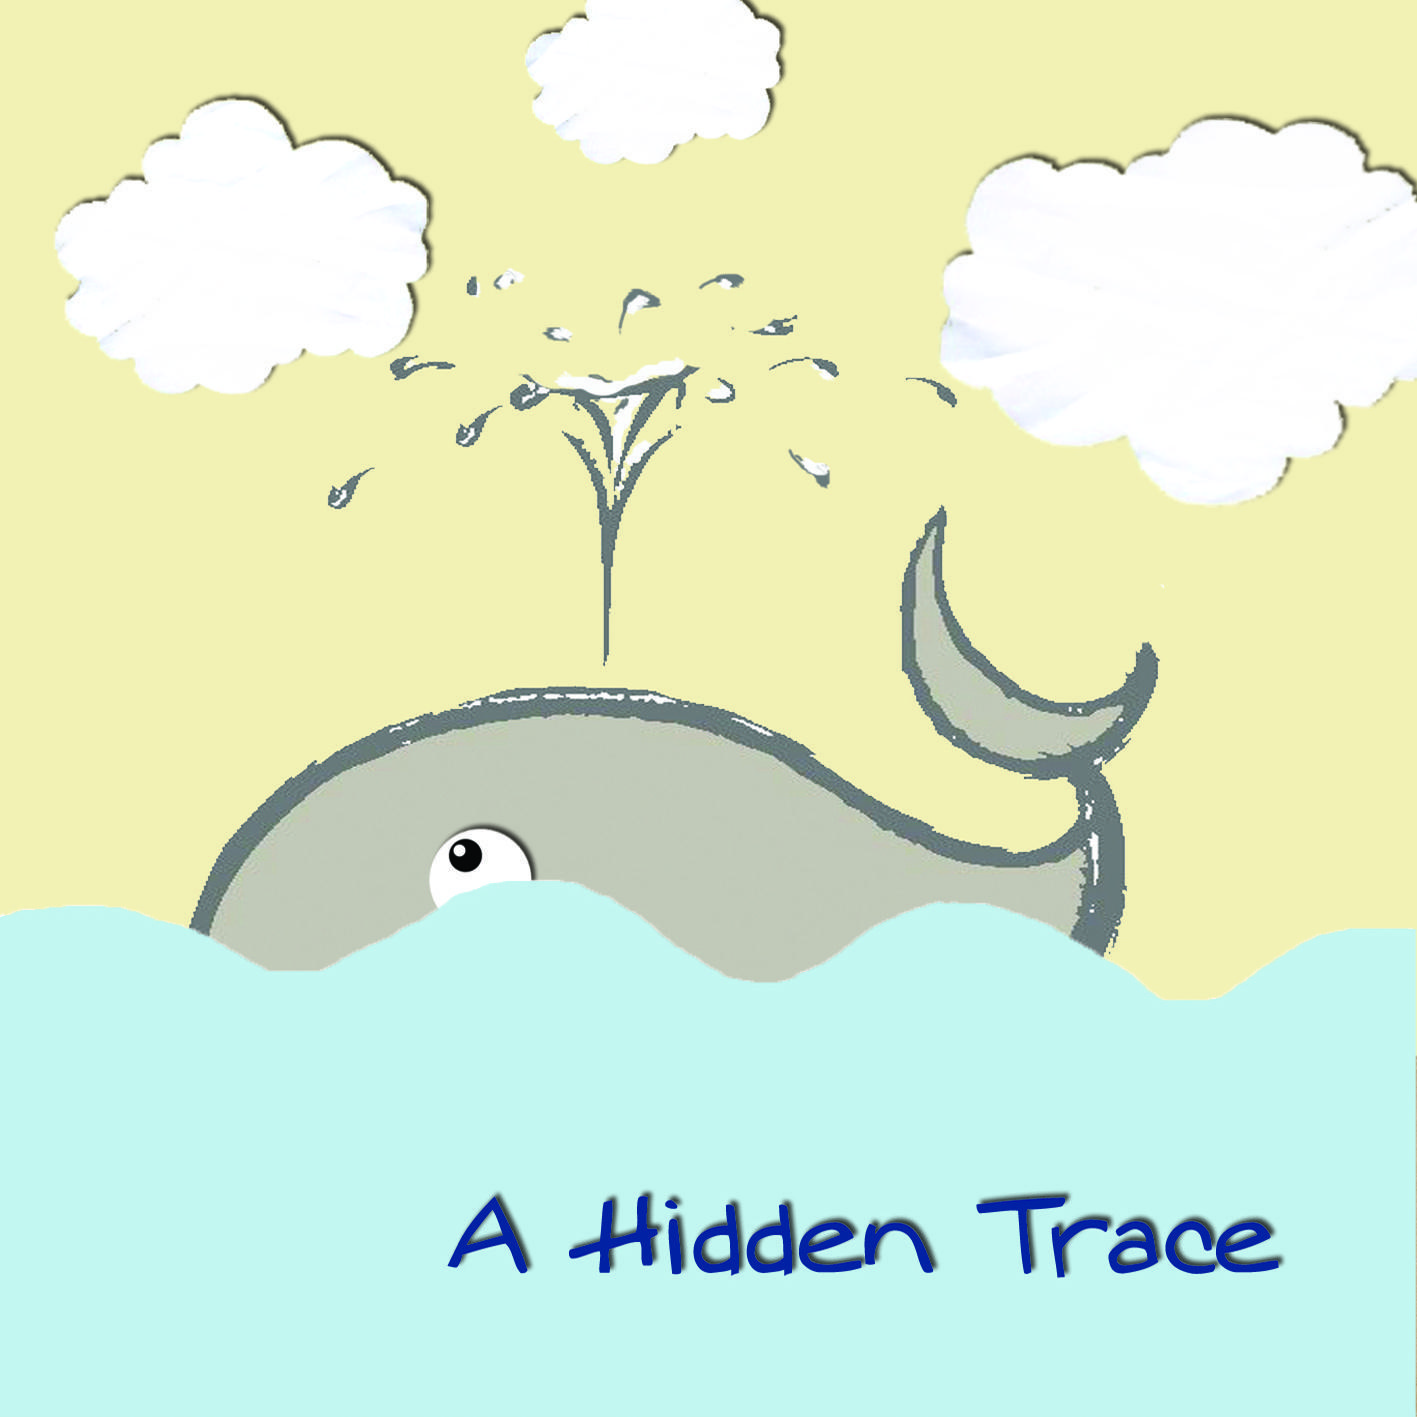 a hidden trace - What a beautiful mask